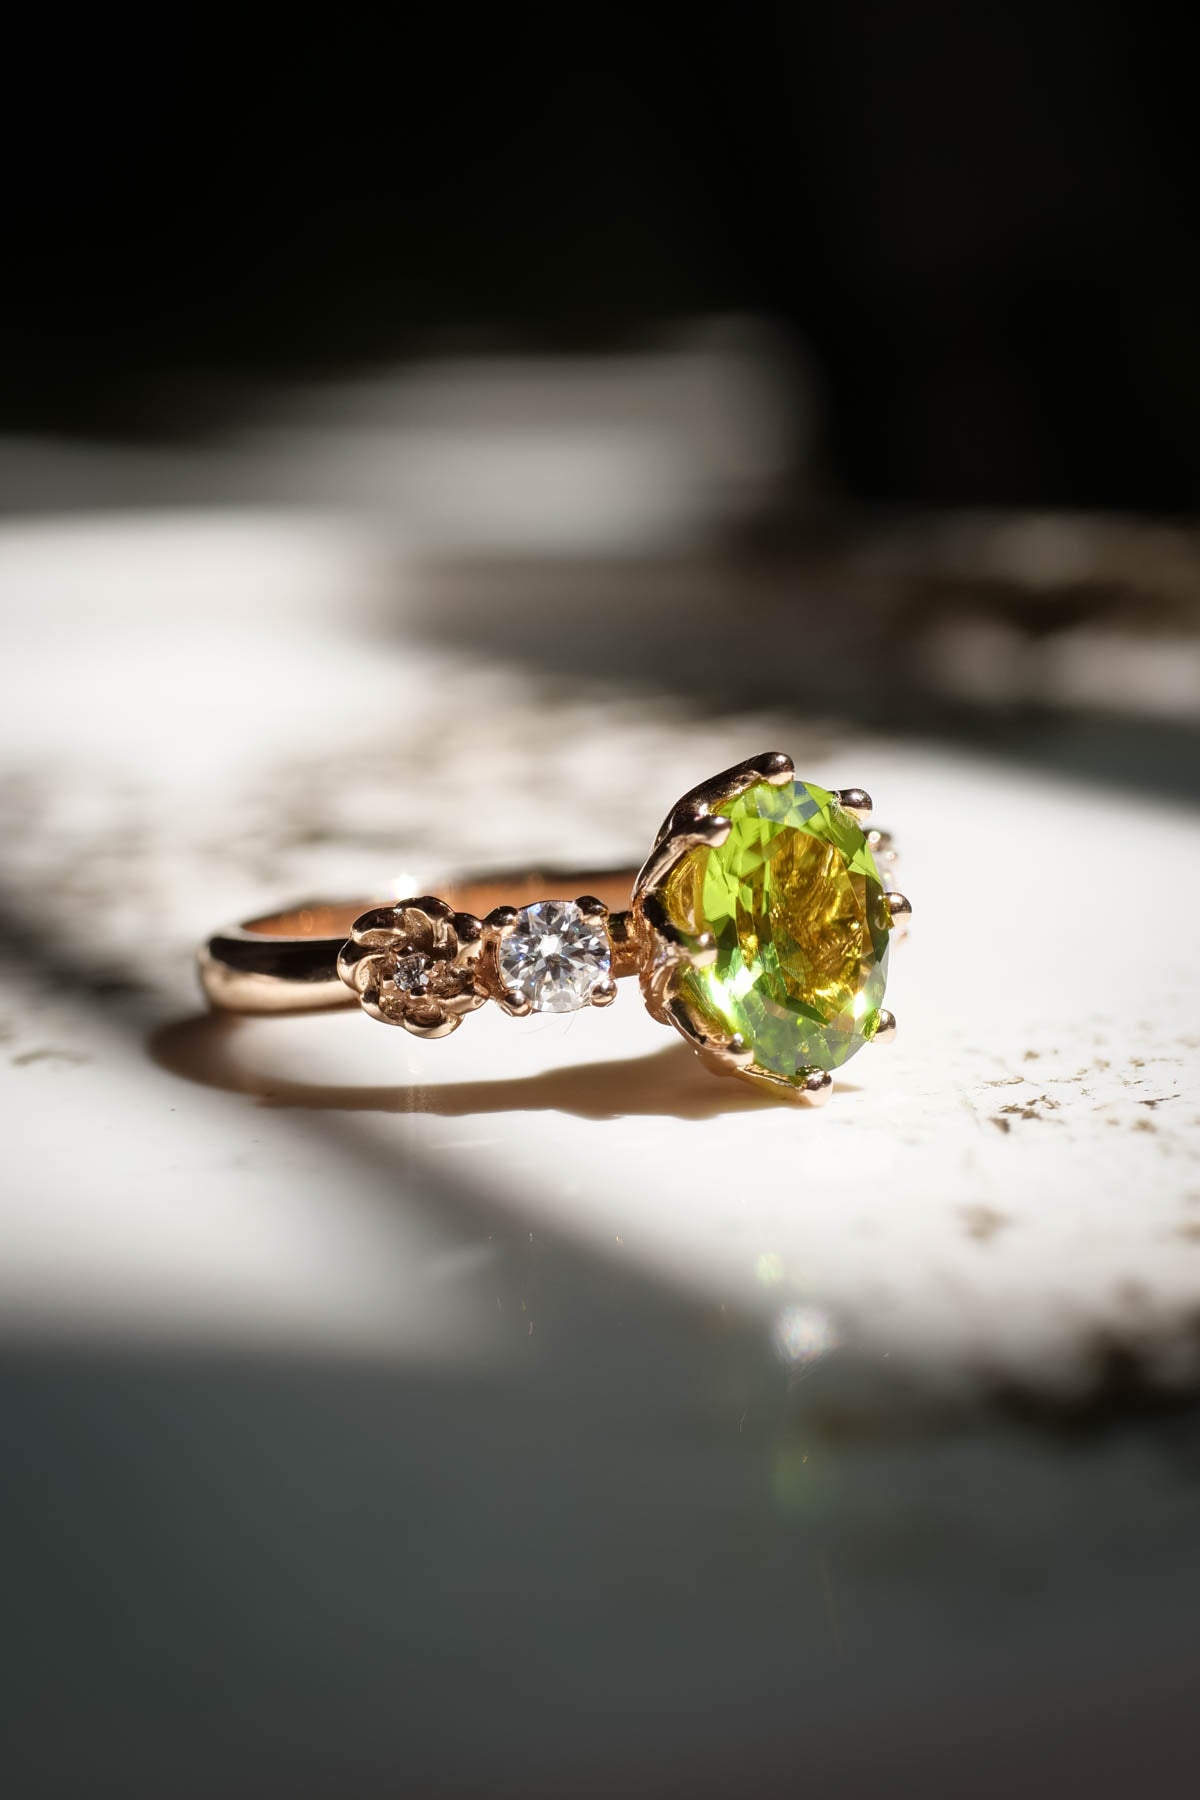 Peridot engagement ring, flower promise ring with diamonds / Fiorella - Eden Garden Jewelry™